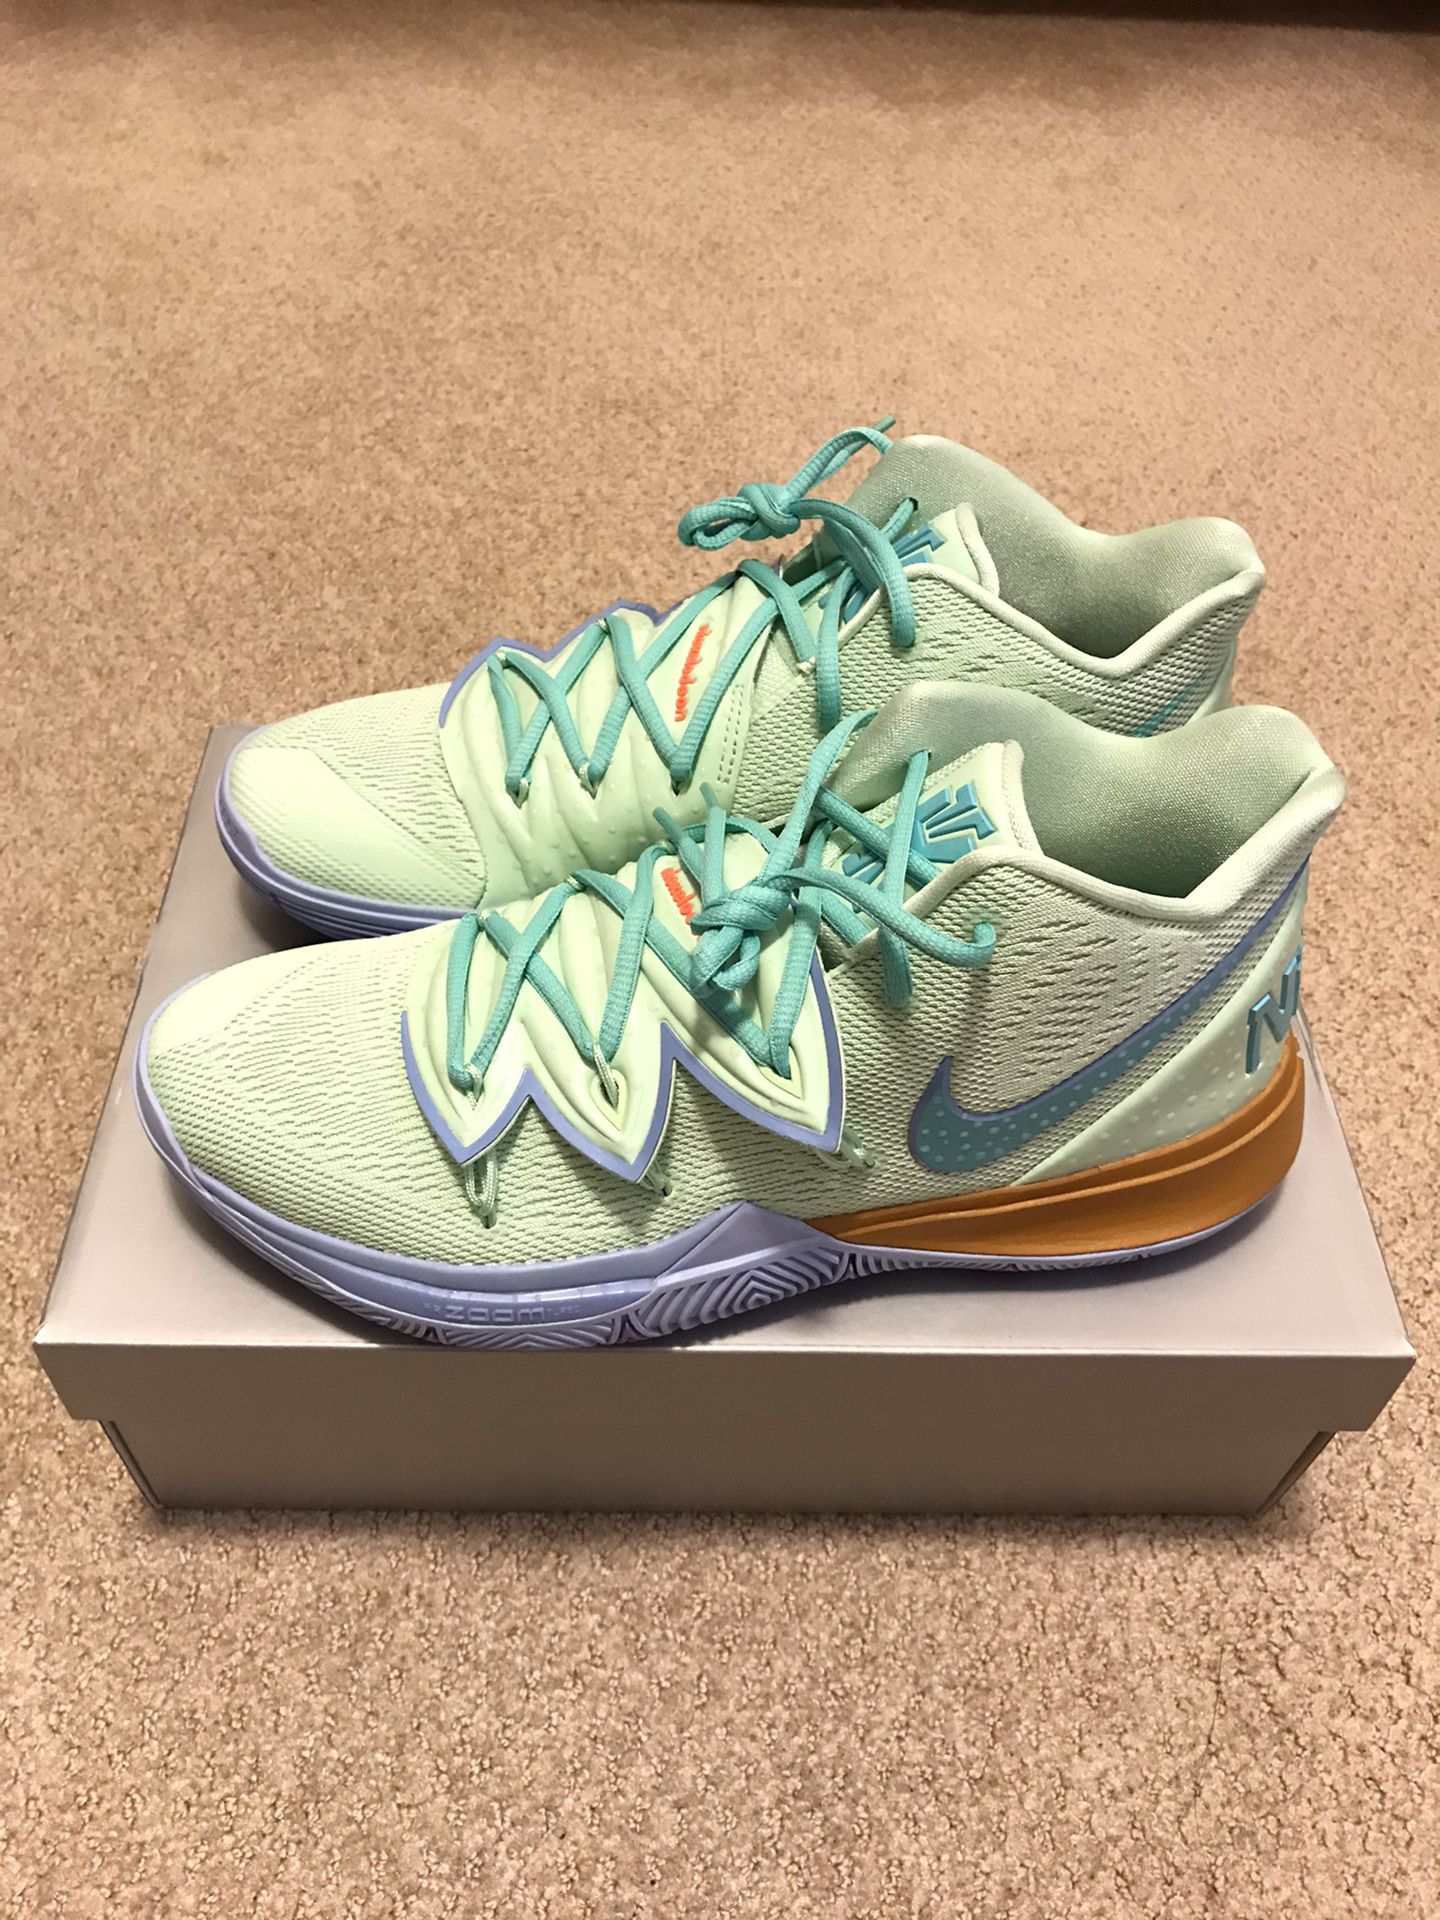 Nike Squidward Tentacles Kyrie Irving 5 Size 10.5